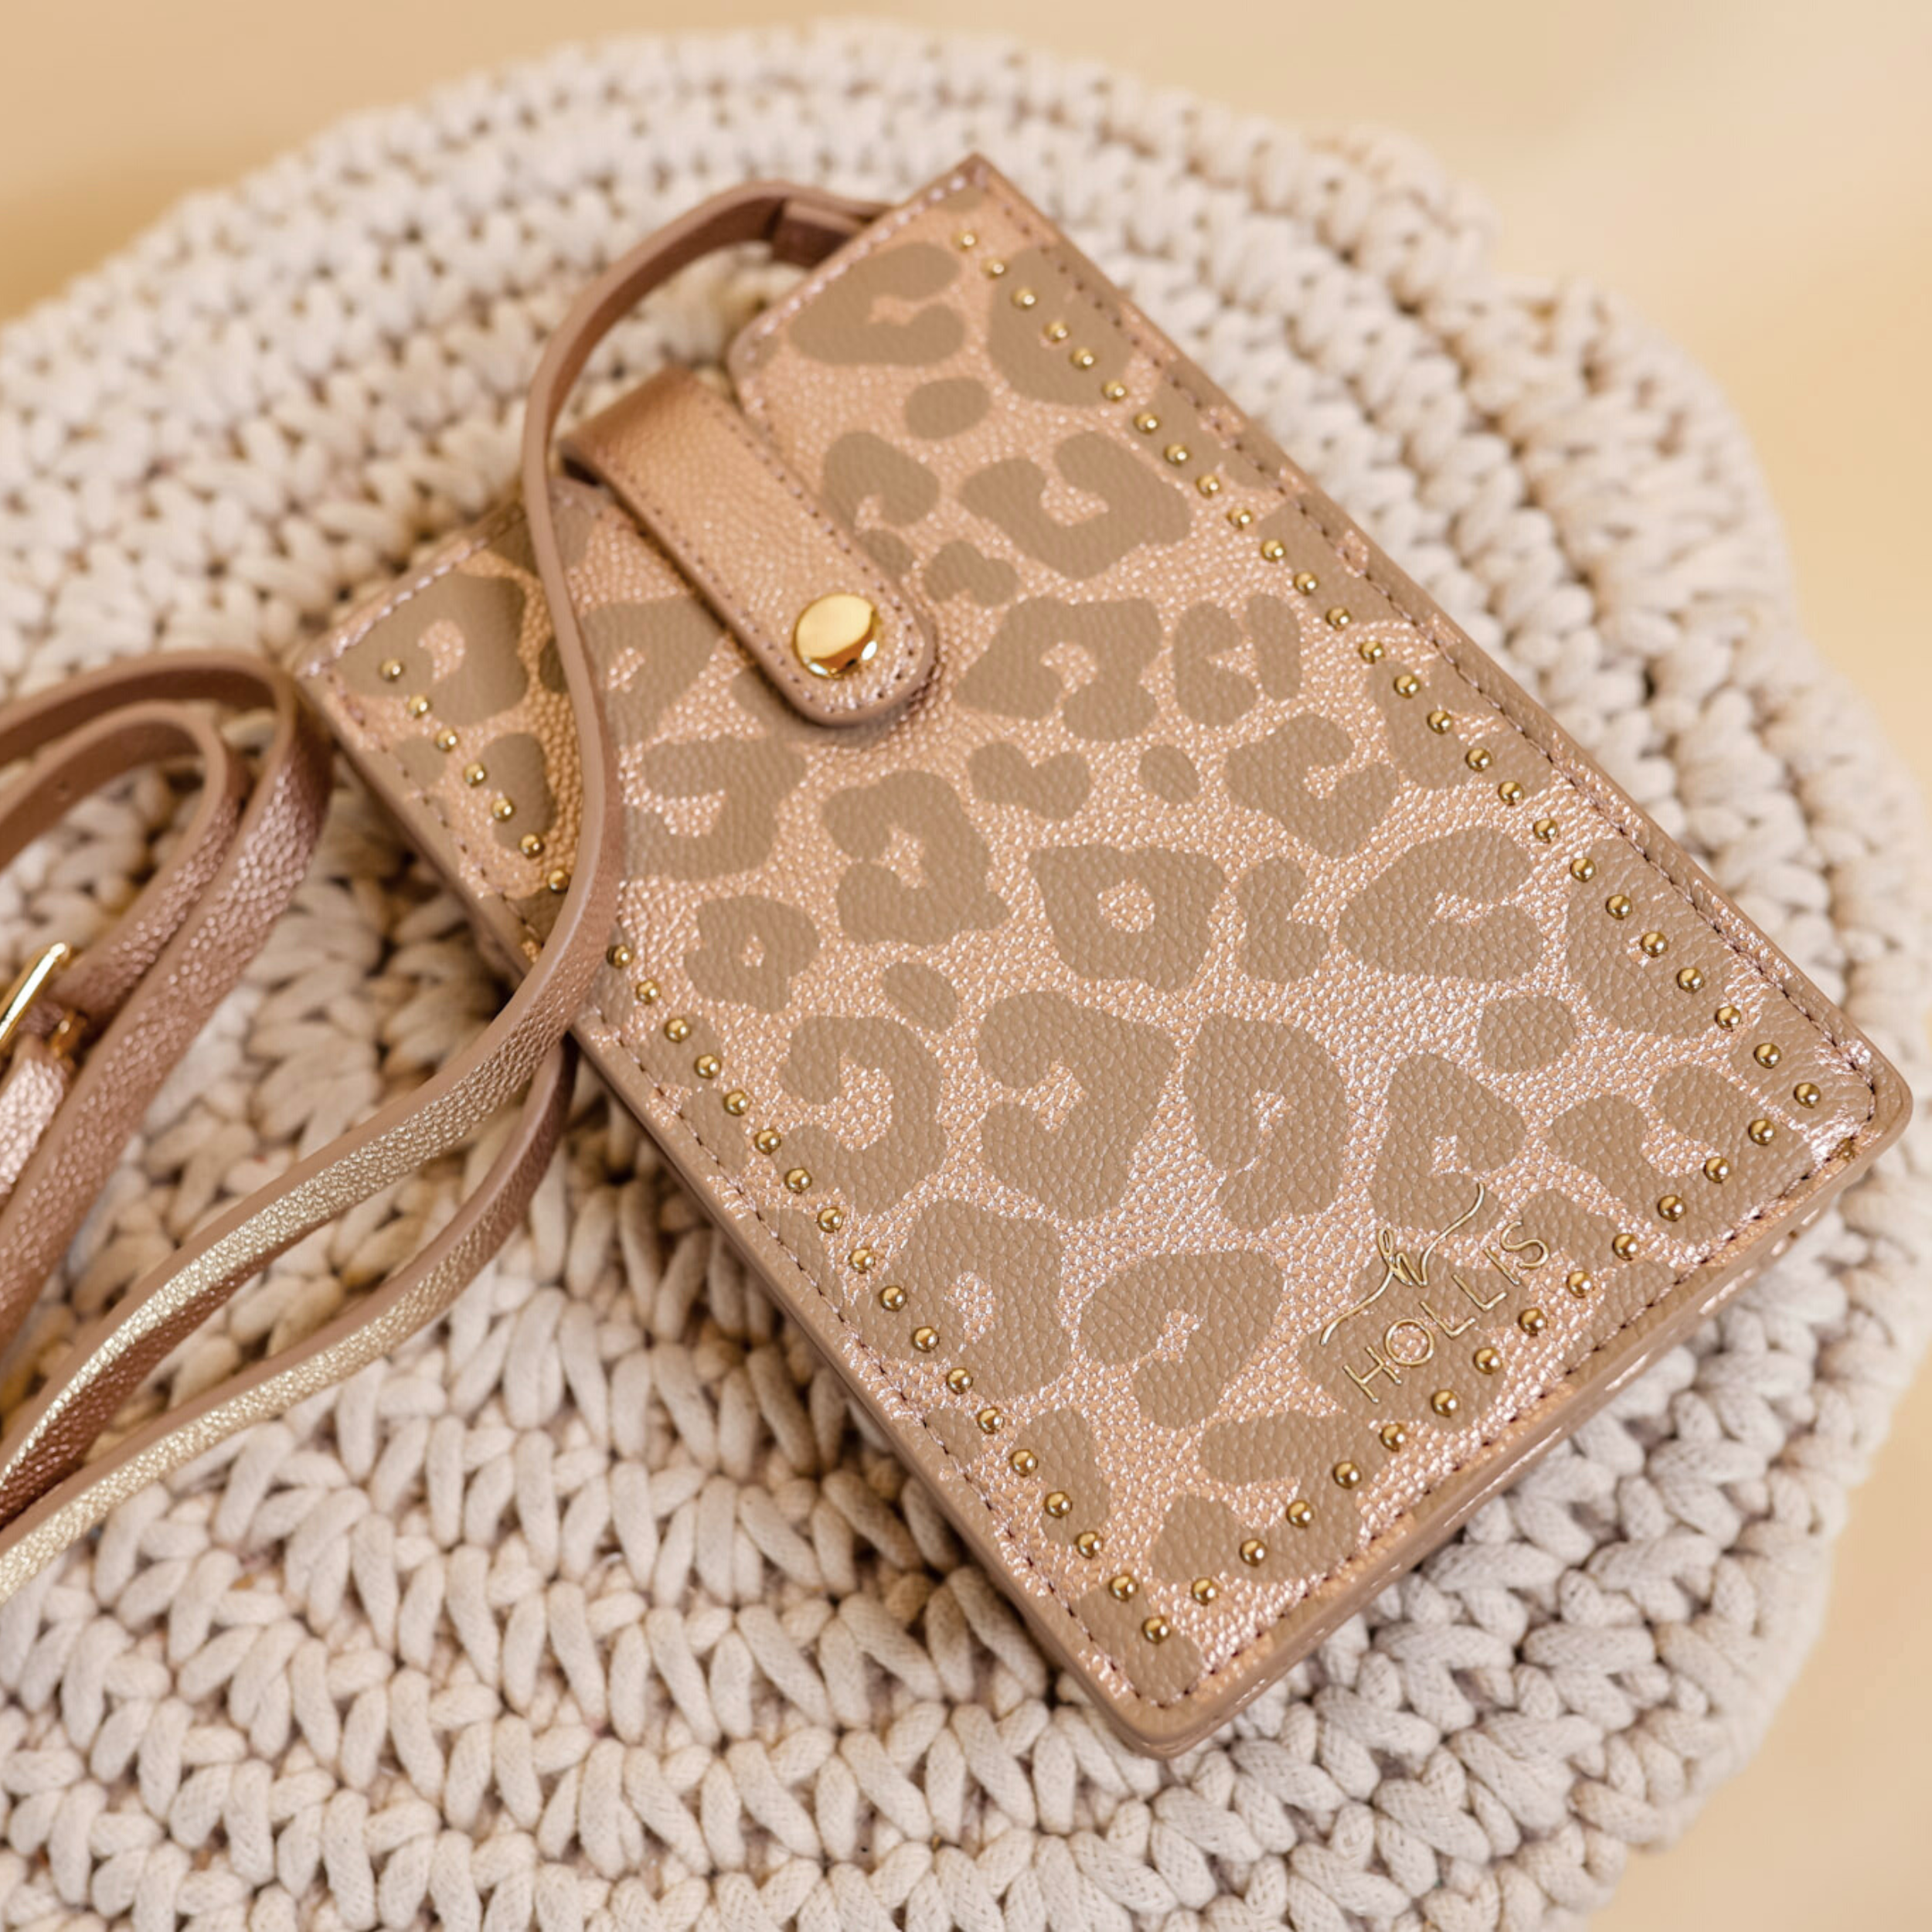 Hollis | Call You Later Crossbody Purse in Leopard - Giddy Up Glamour Boutique